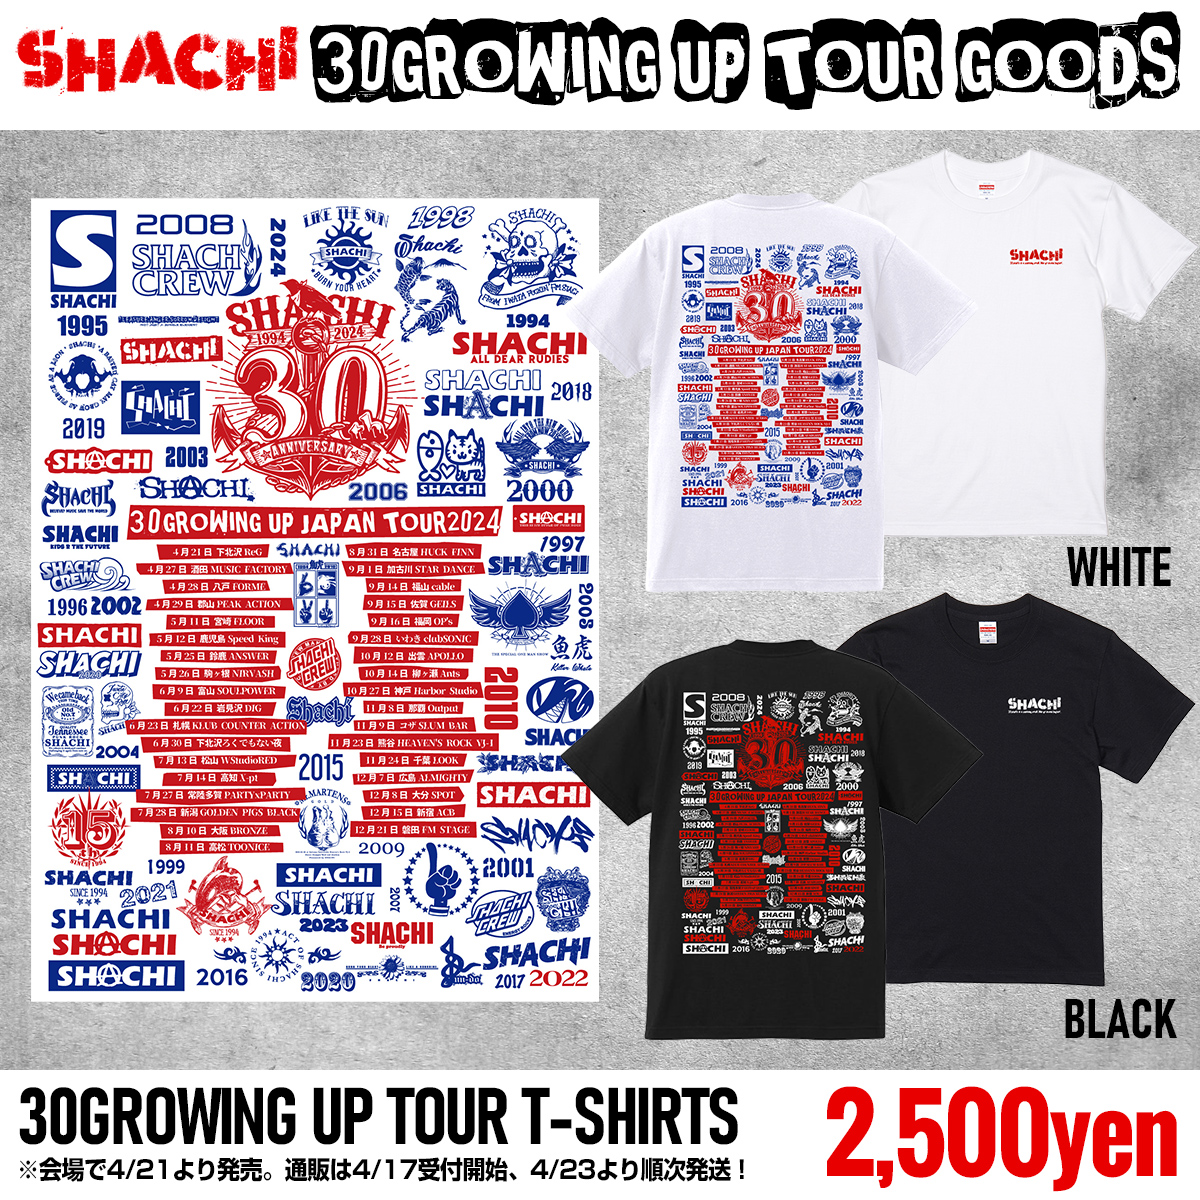 SHACHI_official tweet picture